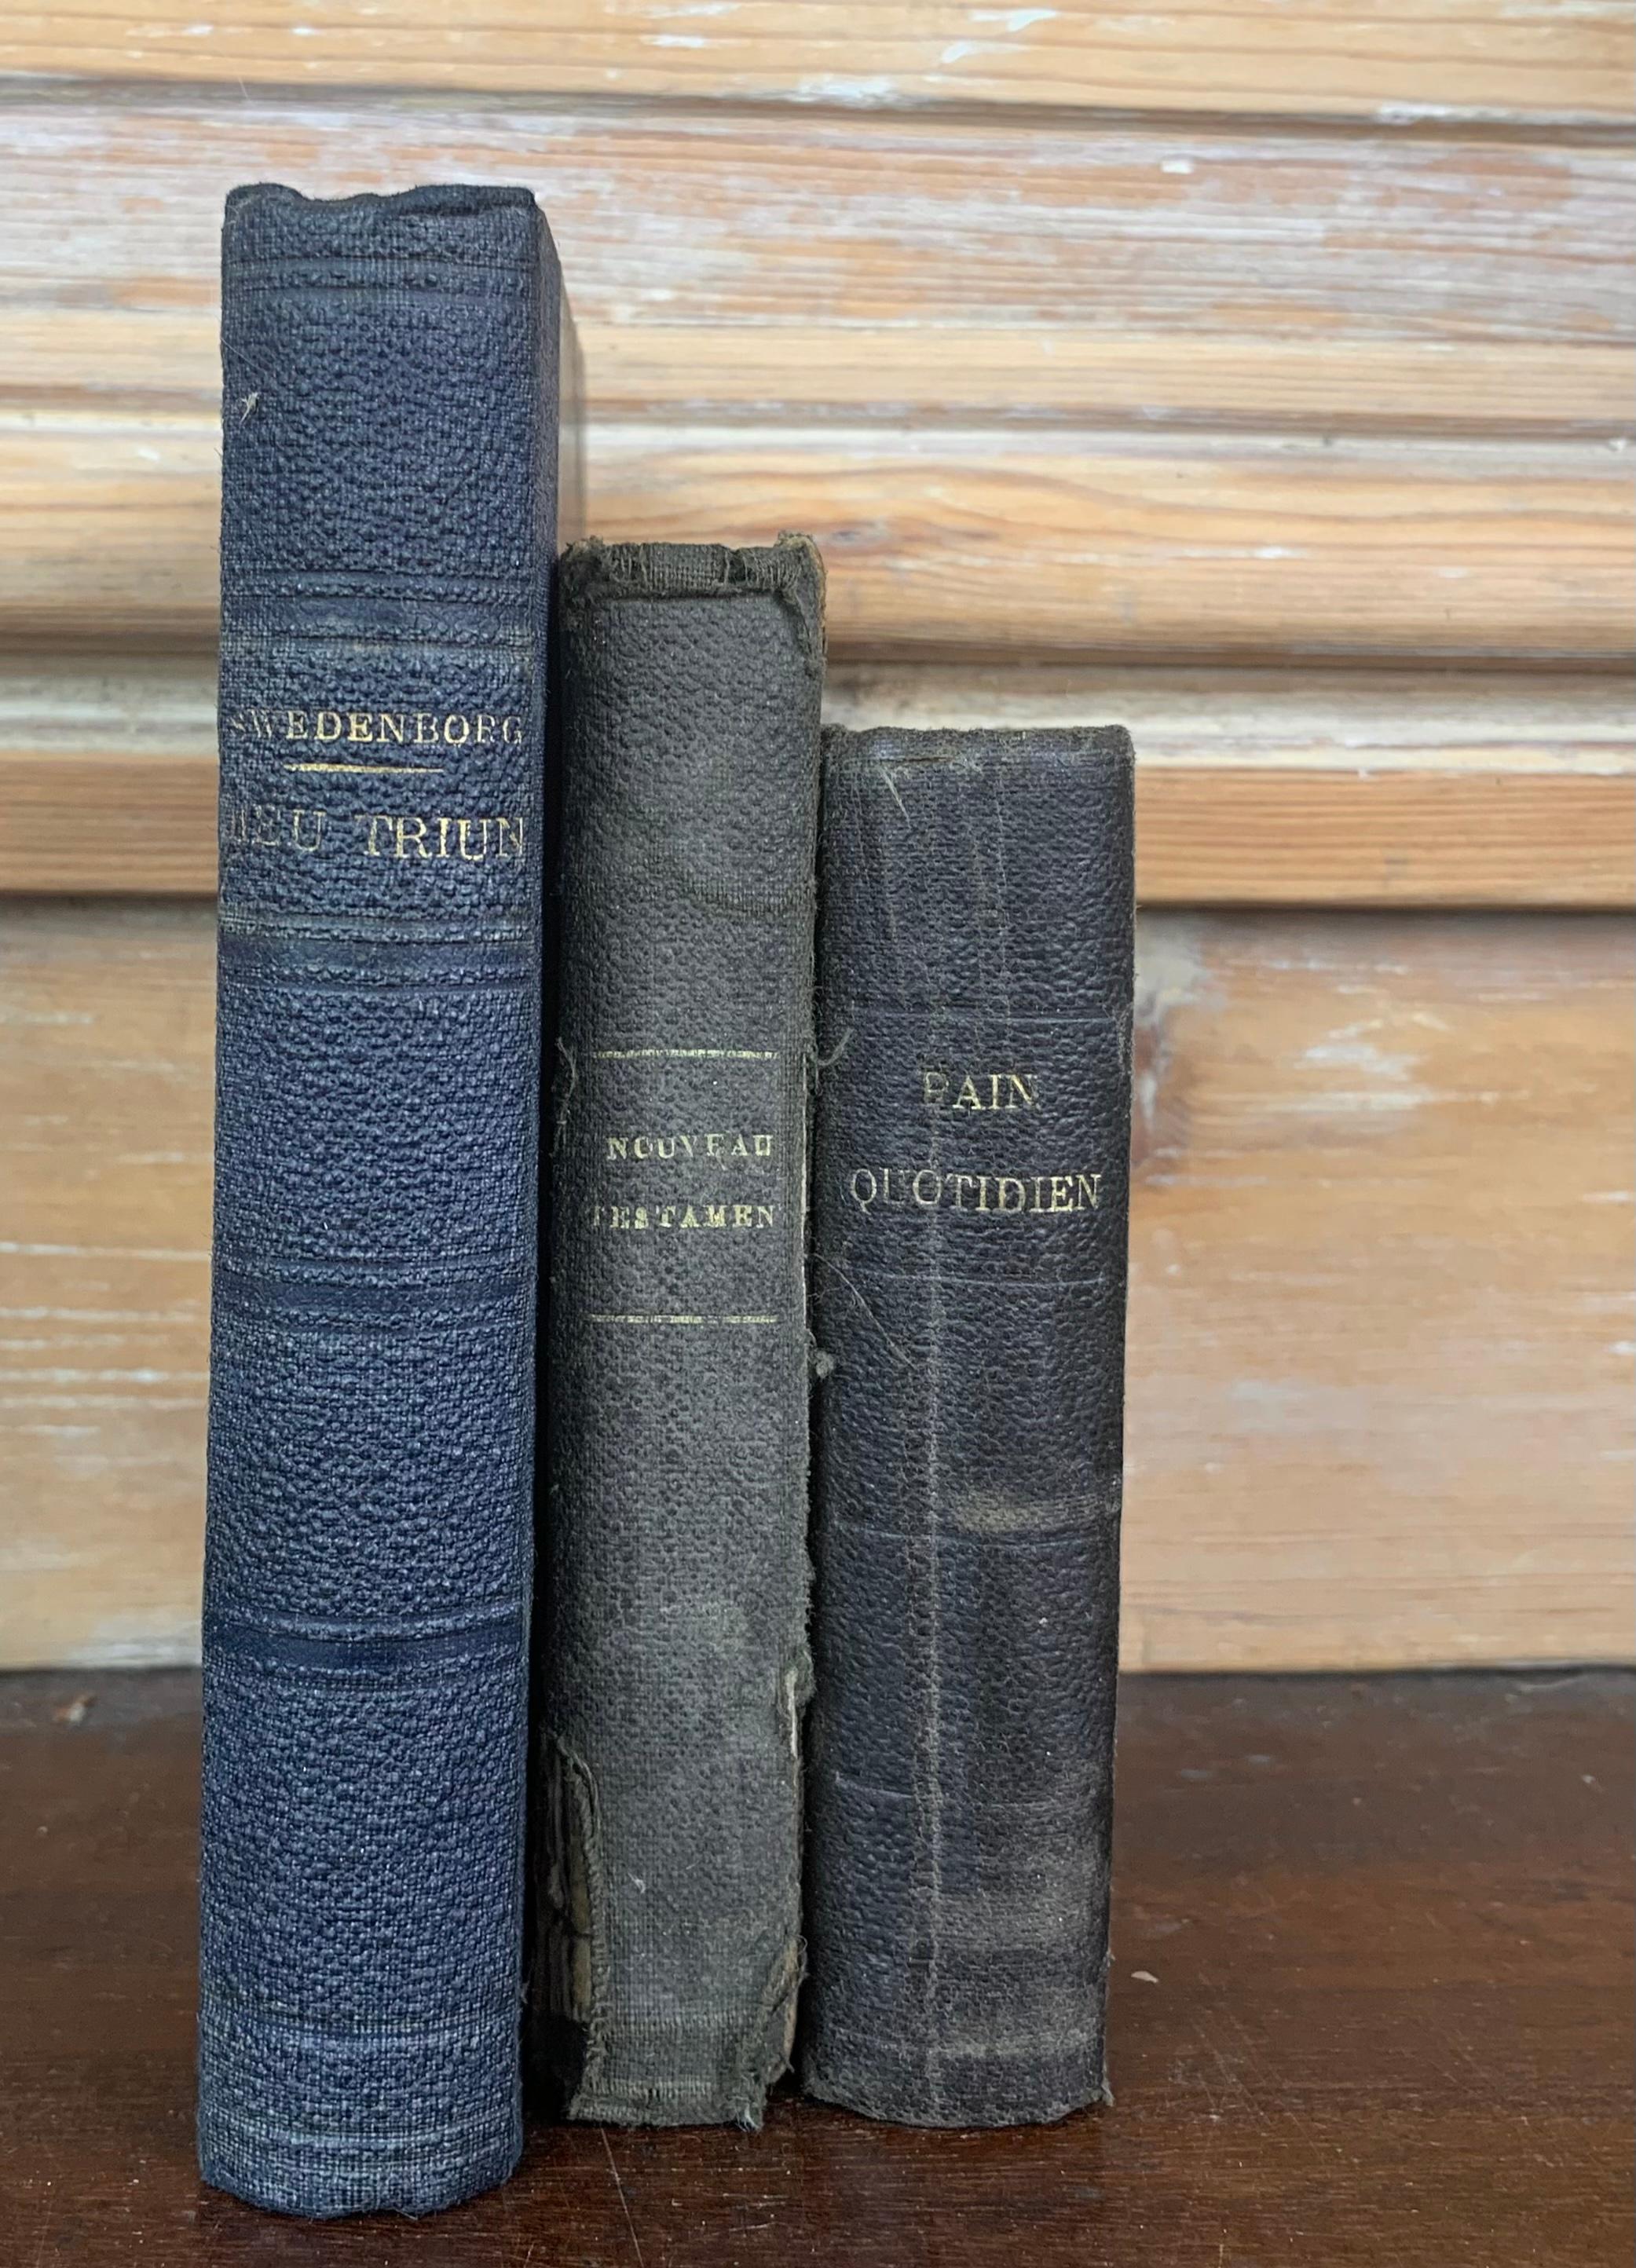 Set of old books dating from the 19th century. From an old protestant library near Le Havre in France. These beautiful books are perfect to fill a nice library. Sizes may vary.